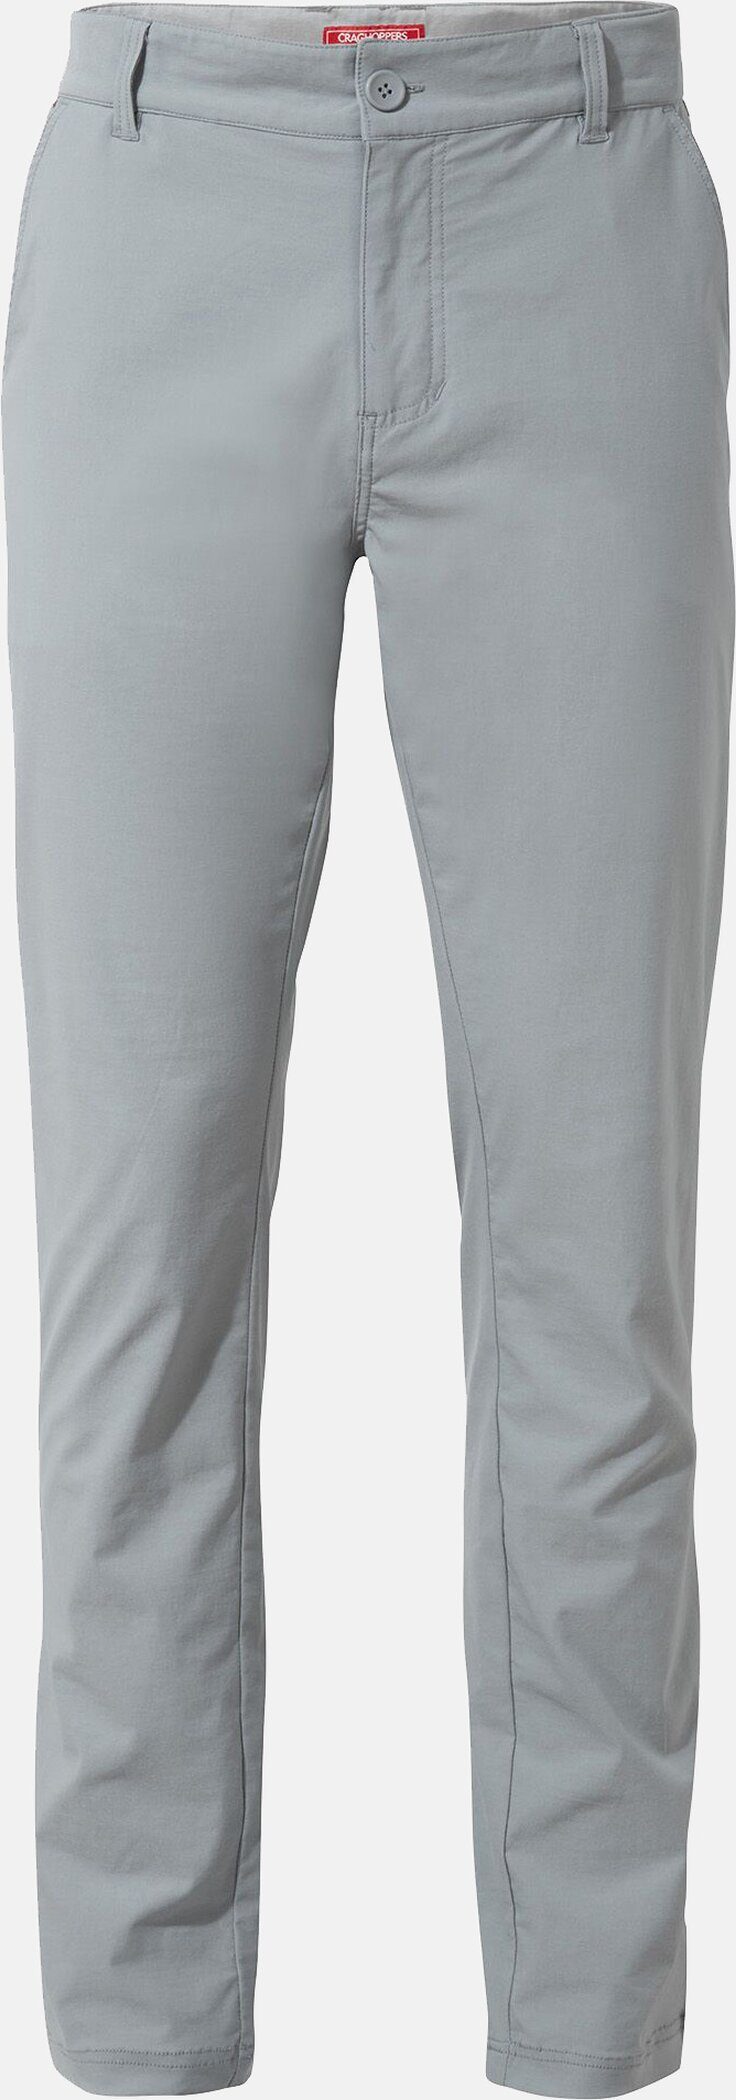 Craghoppers Trousers Funktionshose